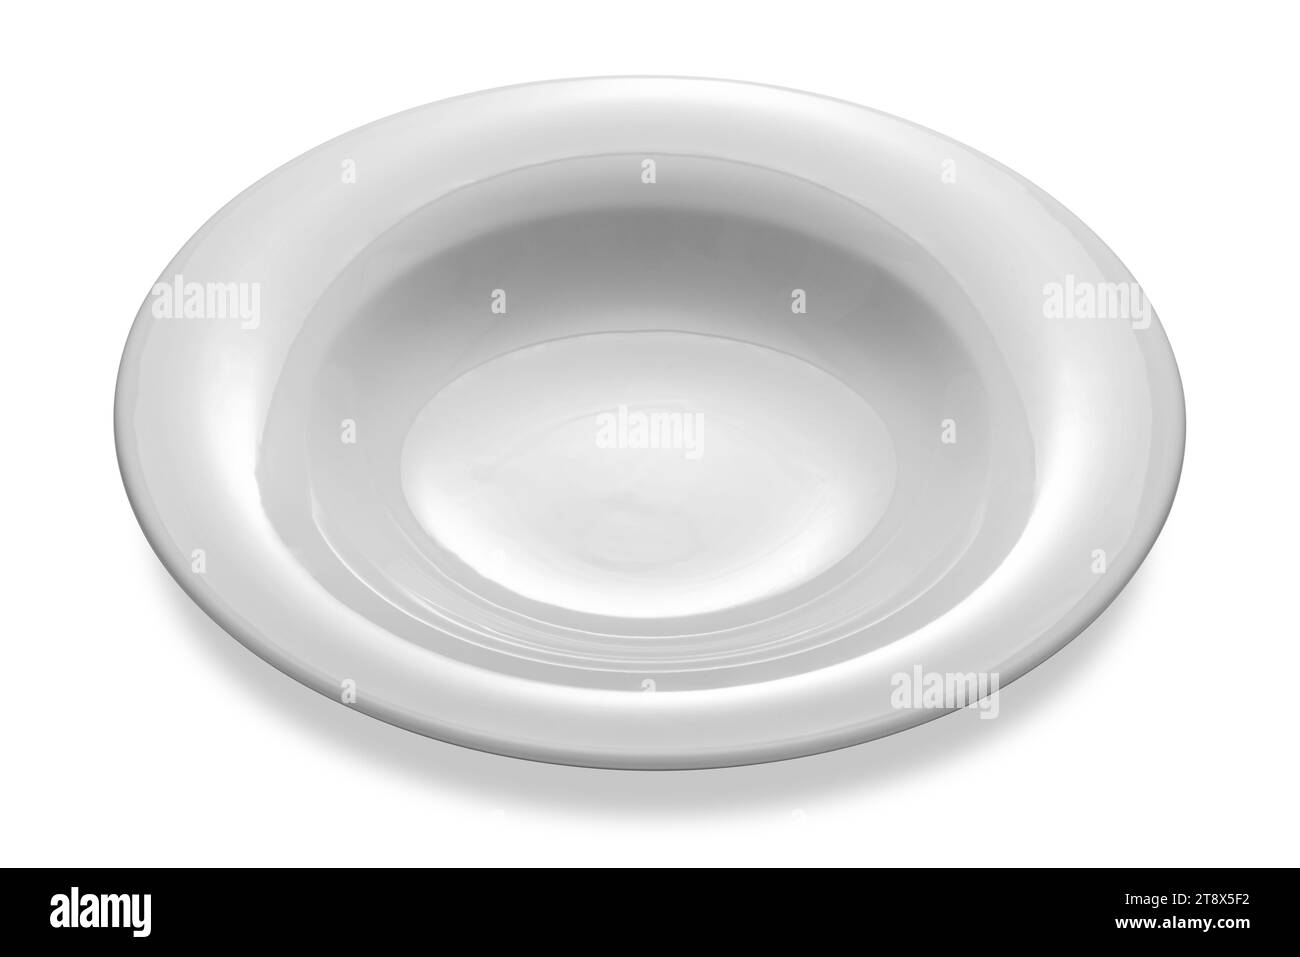 White ceramic dish  isolated on white with clipping path included Stock Photo